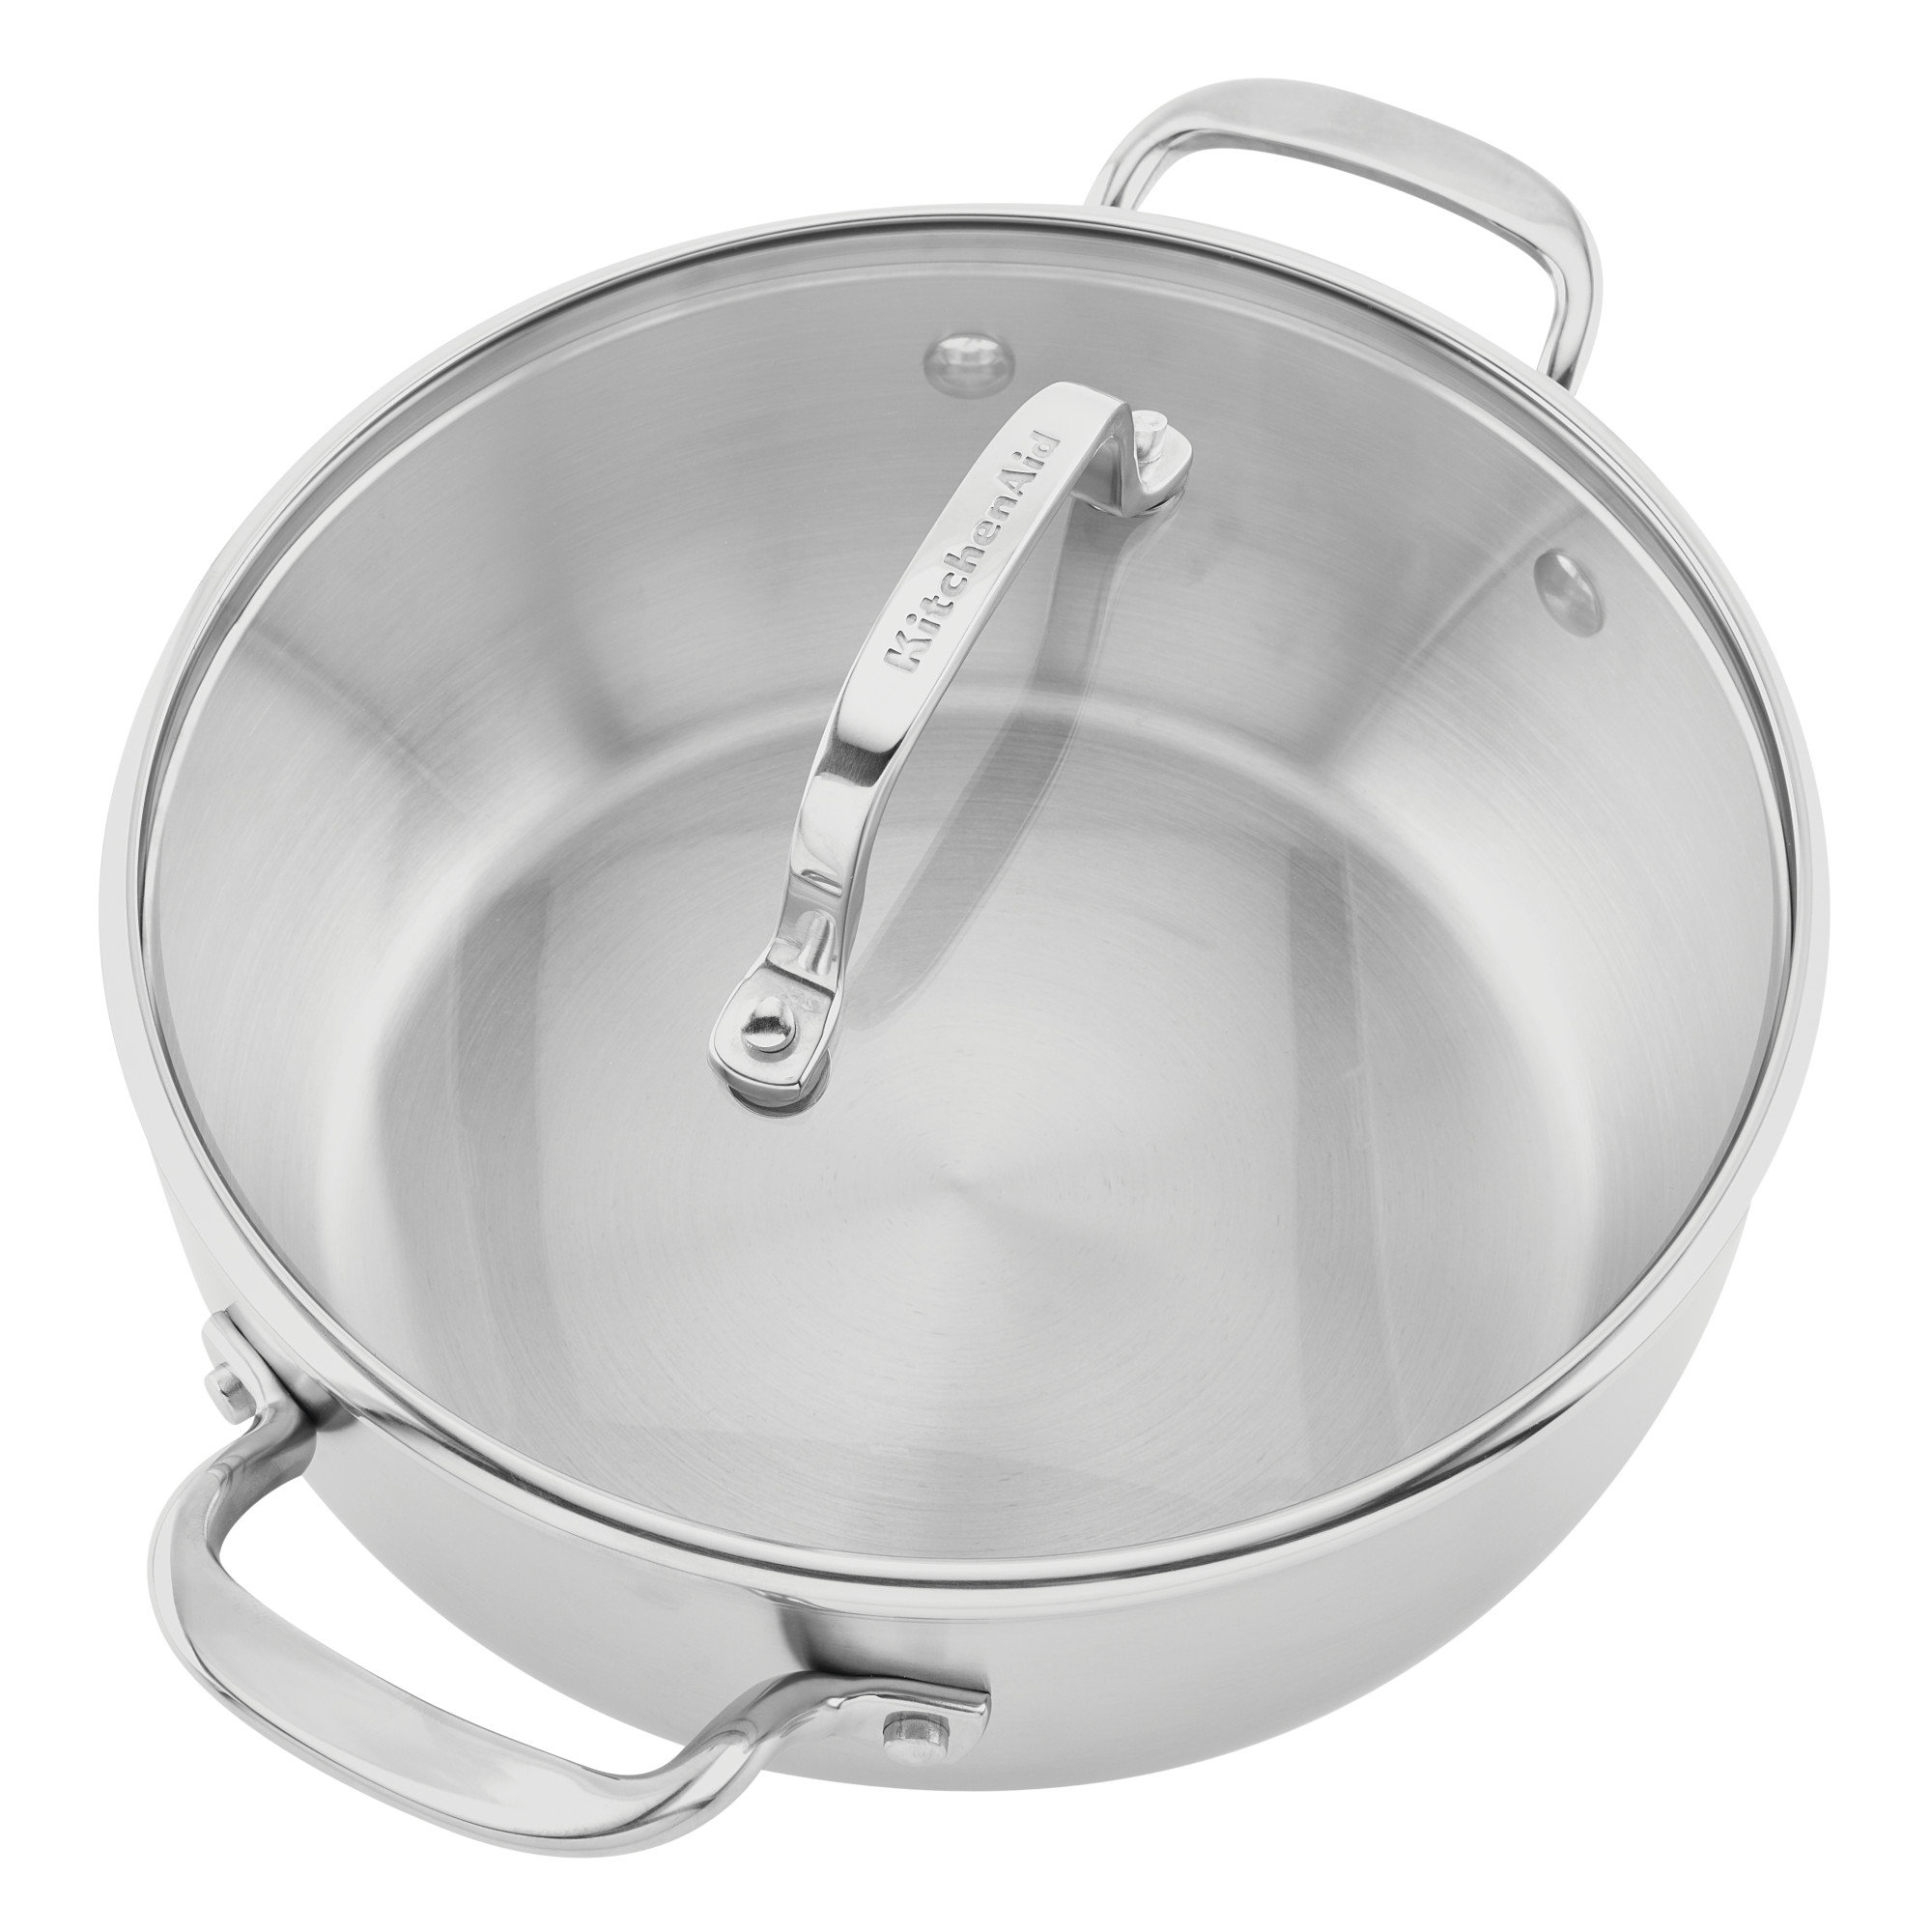 KitchenAid Base Stainless Steel Casserole Lid, Brushed Stainless Steel & Reviews | Wayfair